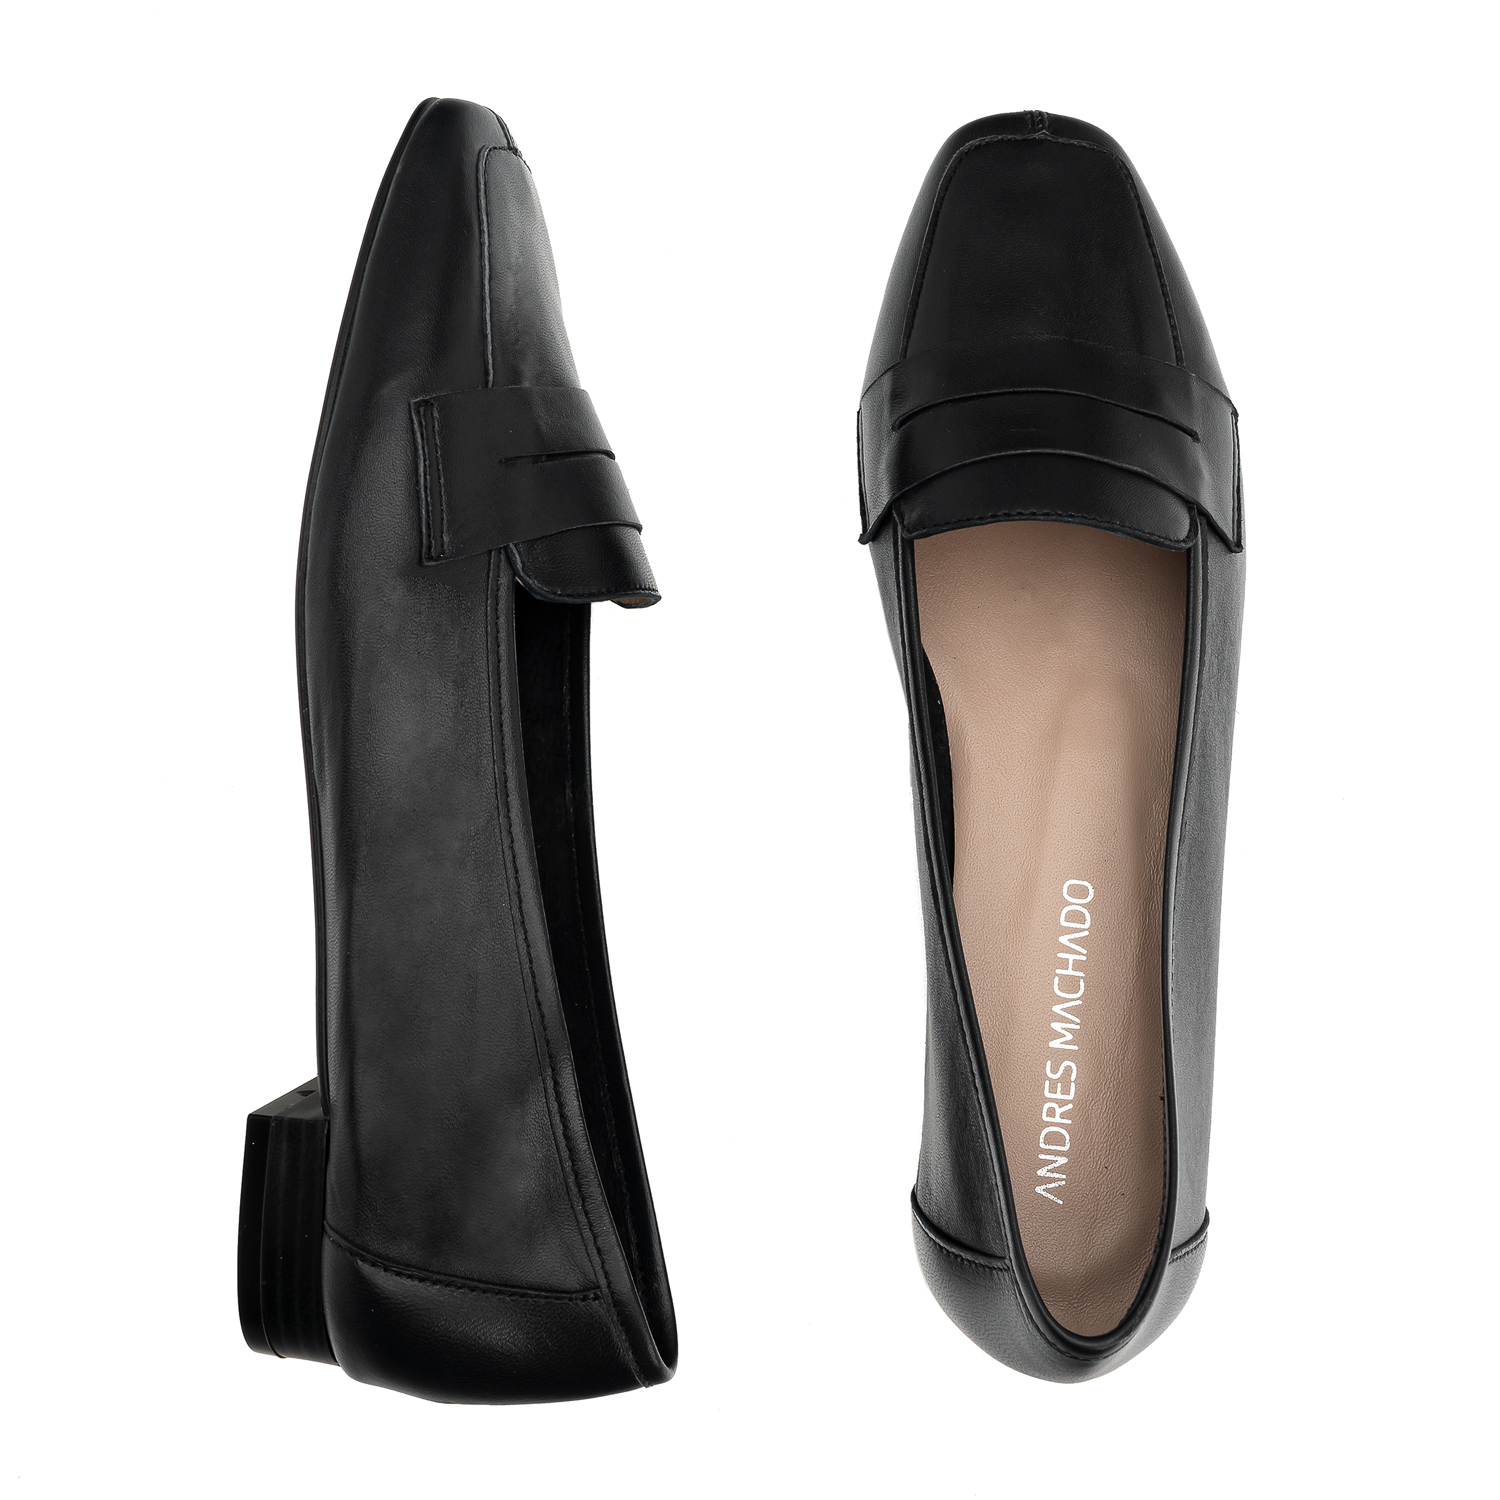 Penny Loafer in Black Leather 